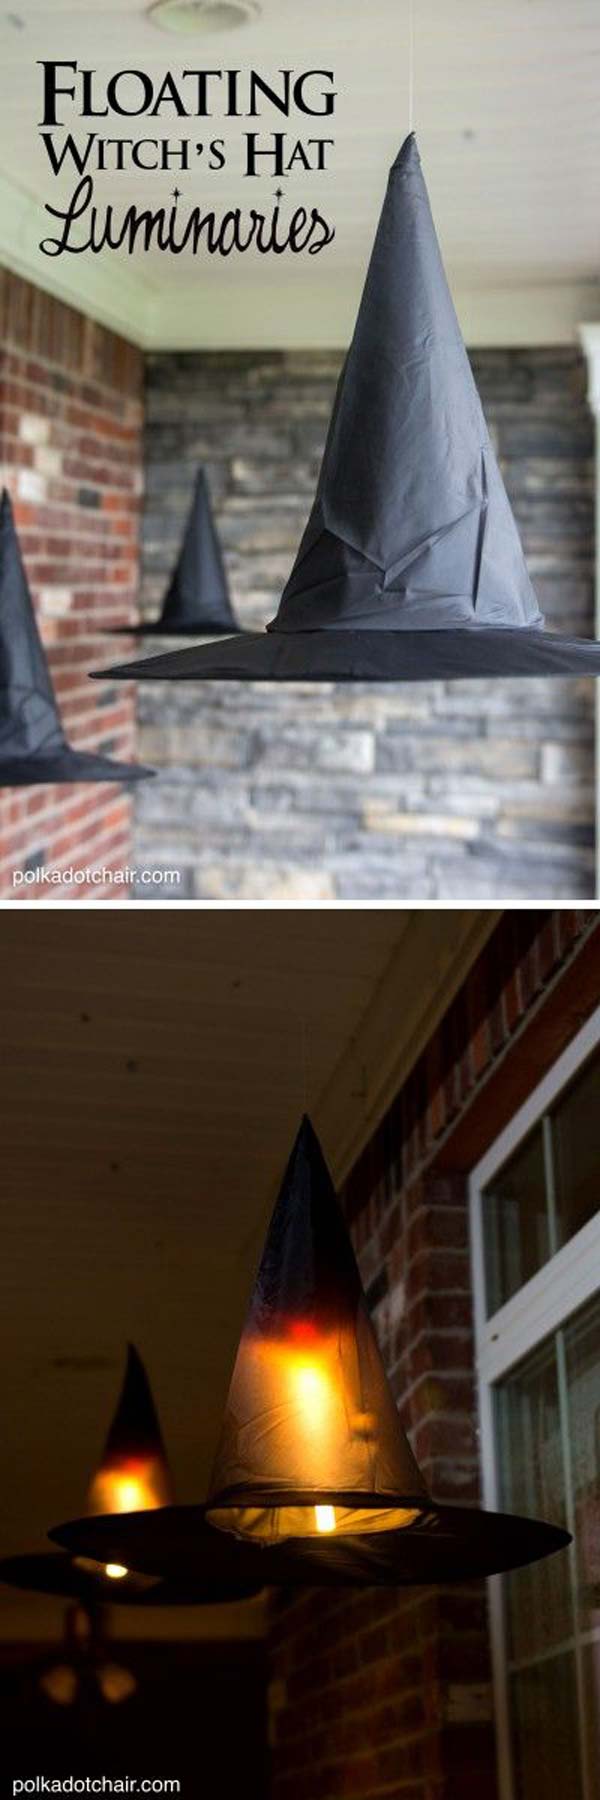 #2 ADD MAGIC TO YOUR PORCH WITH FLOATING WITCH HATS LUMINARIES